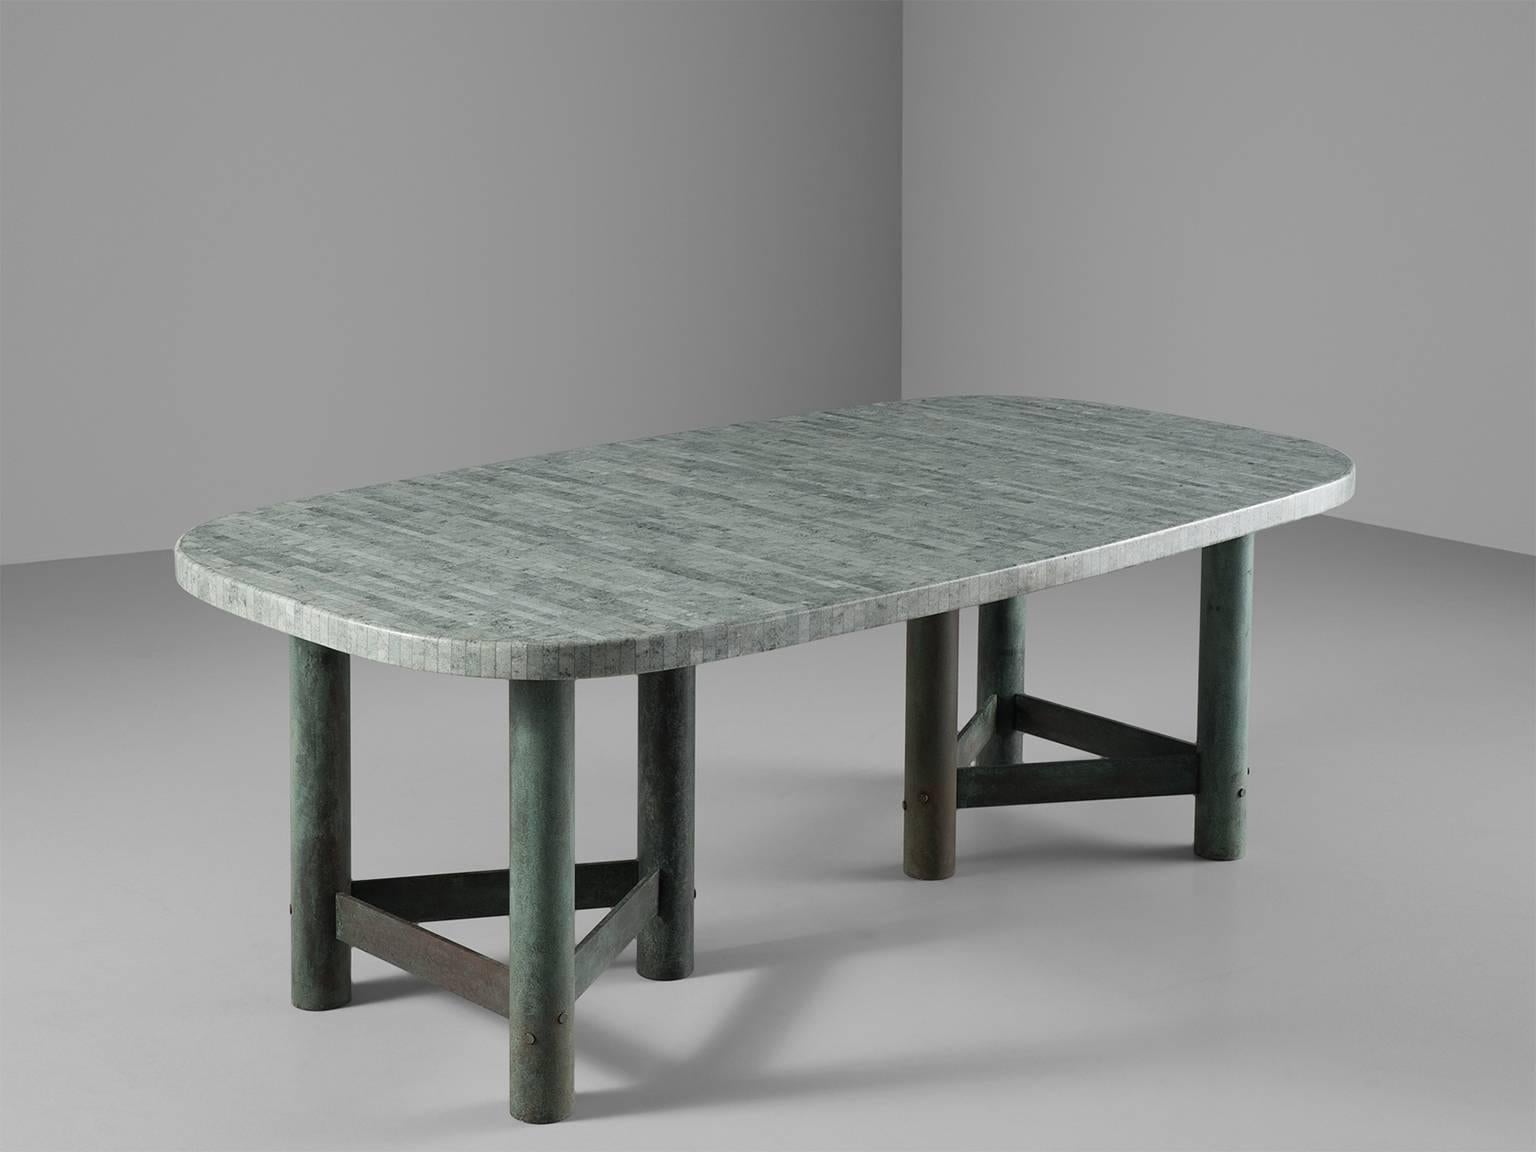 Dining table, marble and patinated bronze by Jan Vlug, Belgium, 1970s.

Exclusive dining table with characteristic graphical base and oval marble top. The base, made of metal, consists of six legs, formed into a star-shape. Two triangles combine